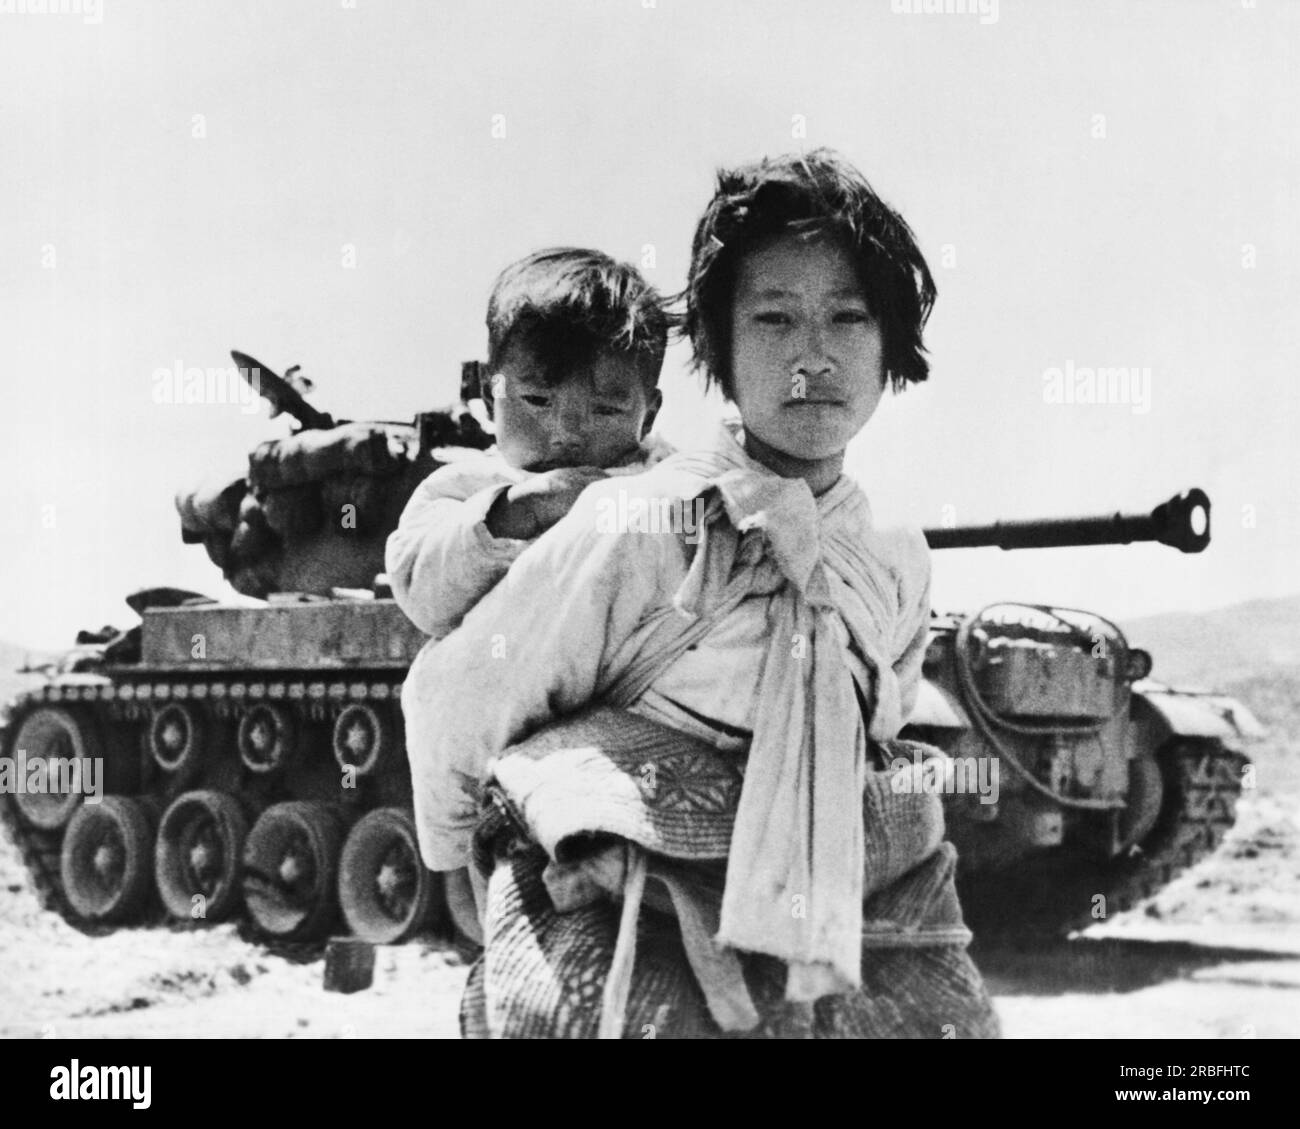 Haengju, Korea:  June 19, 1953 A nine year old Korean refugee girl carrying her small brother trudges past a Patton tank. The rest of her family has been killed in the war. Stock Photo